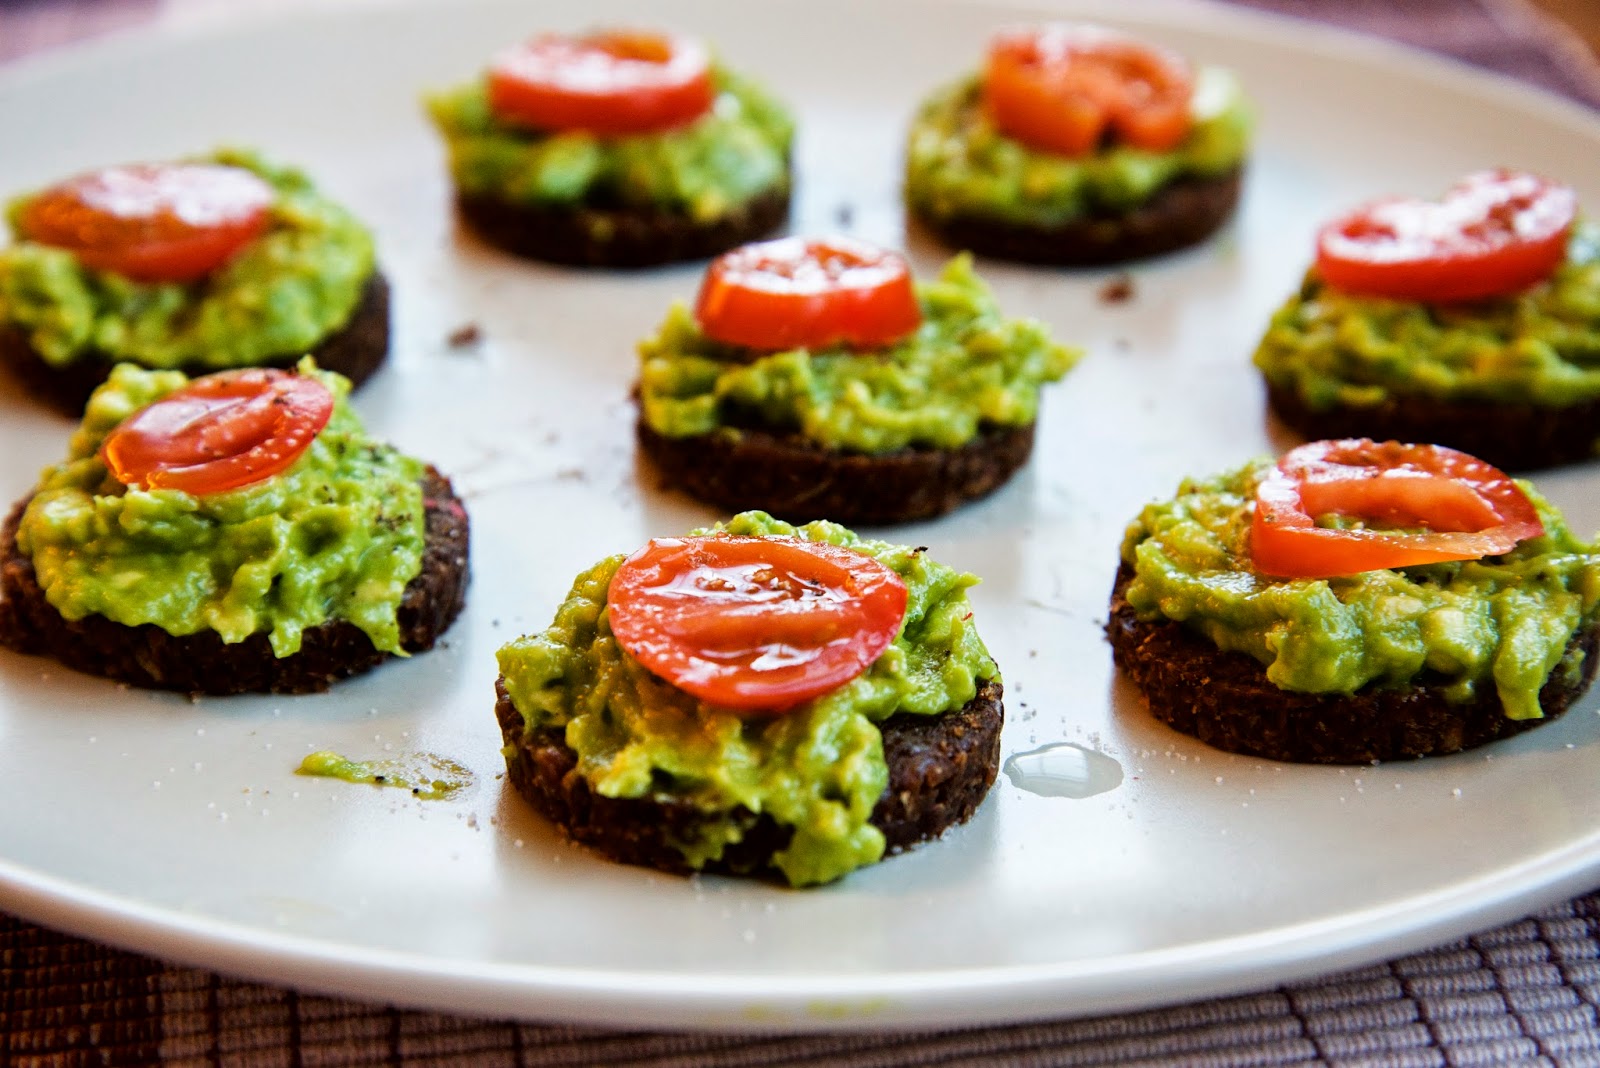 Motivated, Young and Healthy : Avocado on pumpernickel